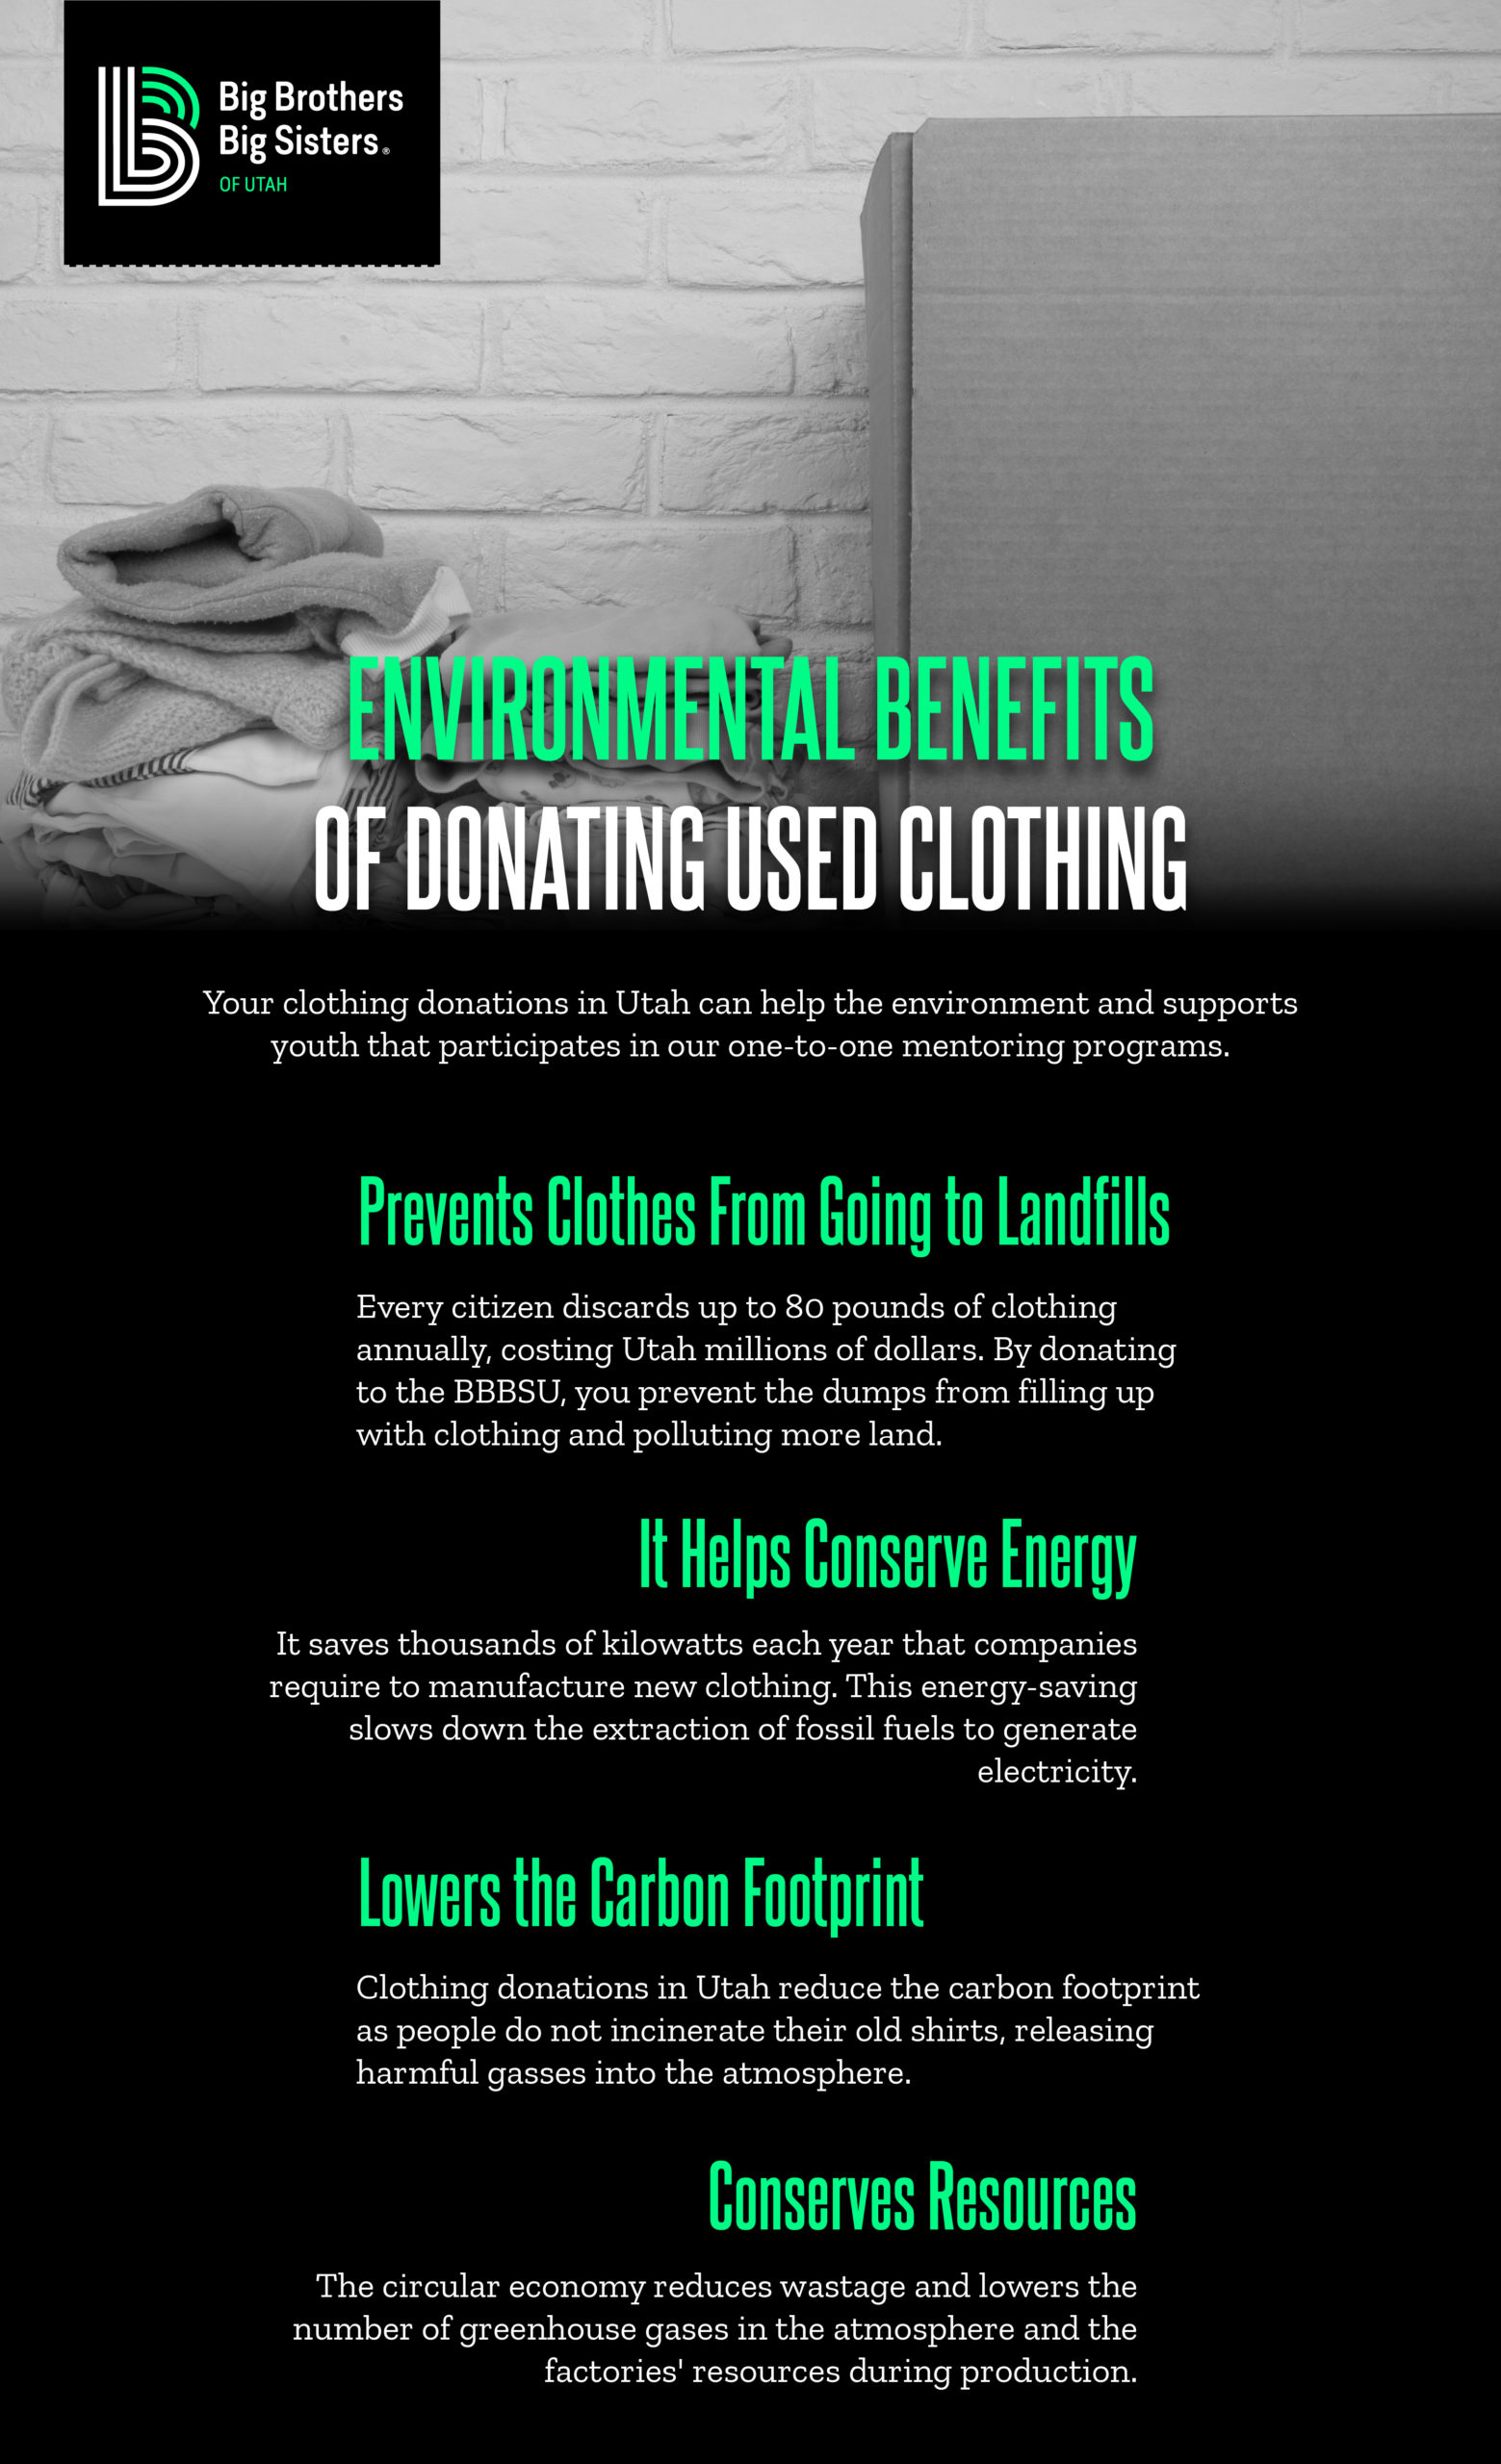 How families can reduce clothing waste and help the environment